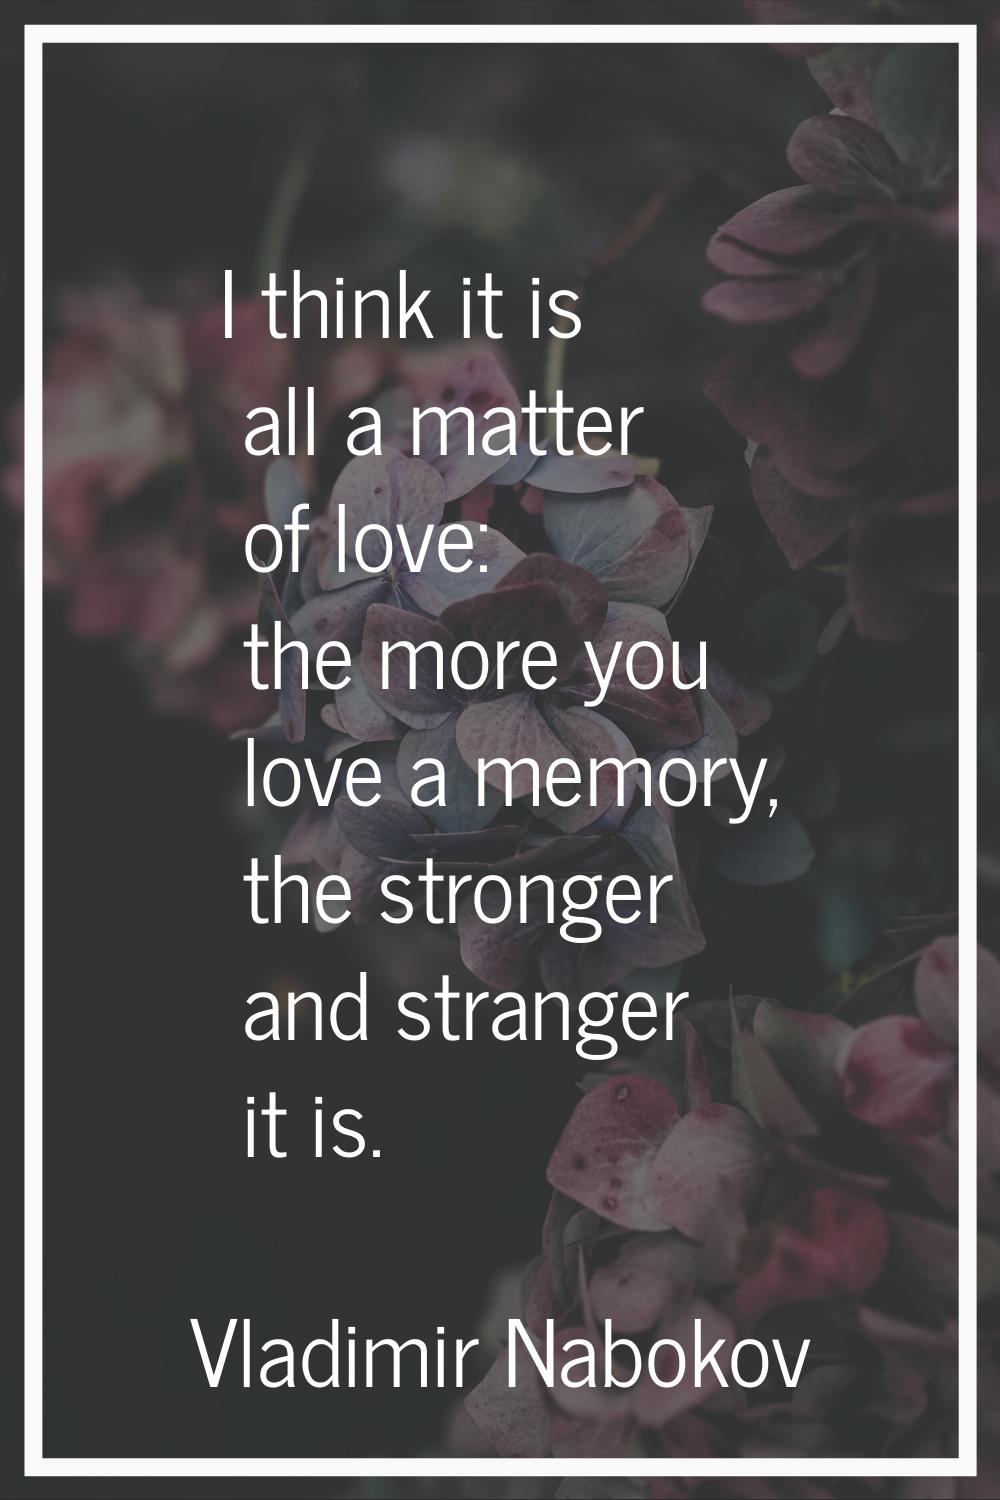 I think it is all a matter of love: the more you love a memory, the stronger and stranger it is.